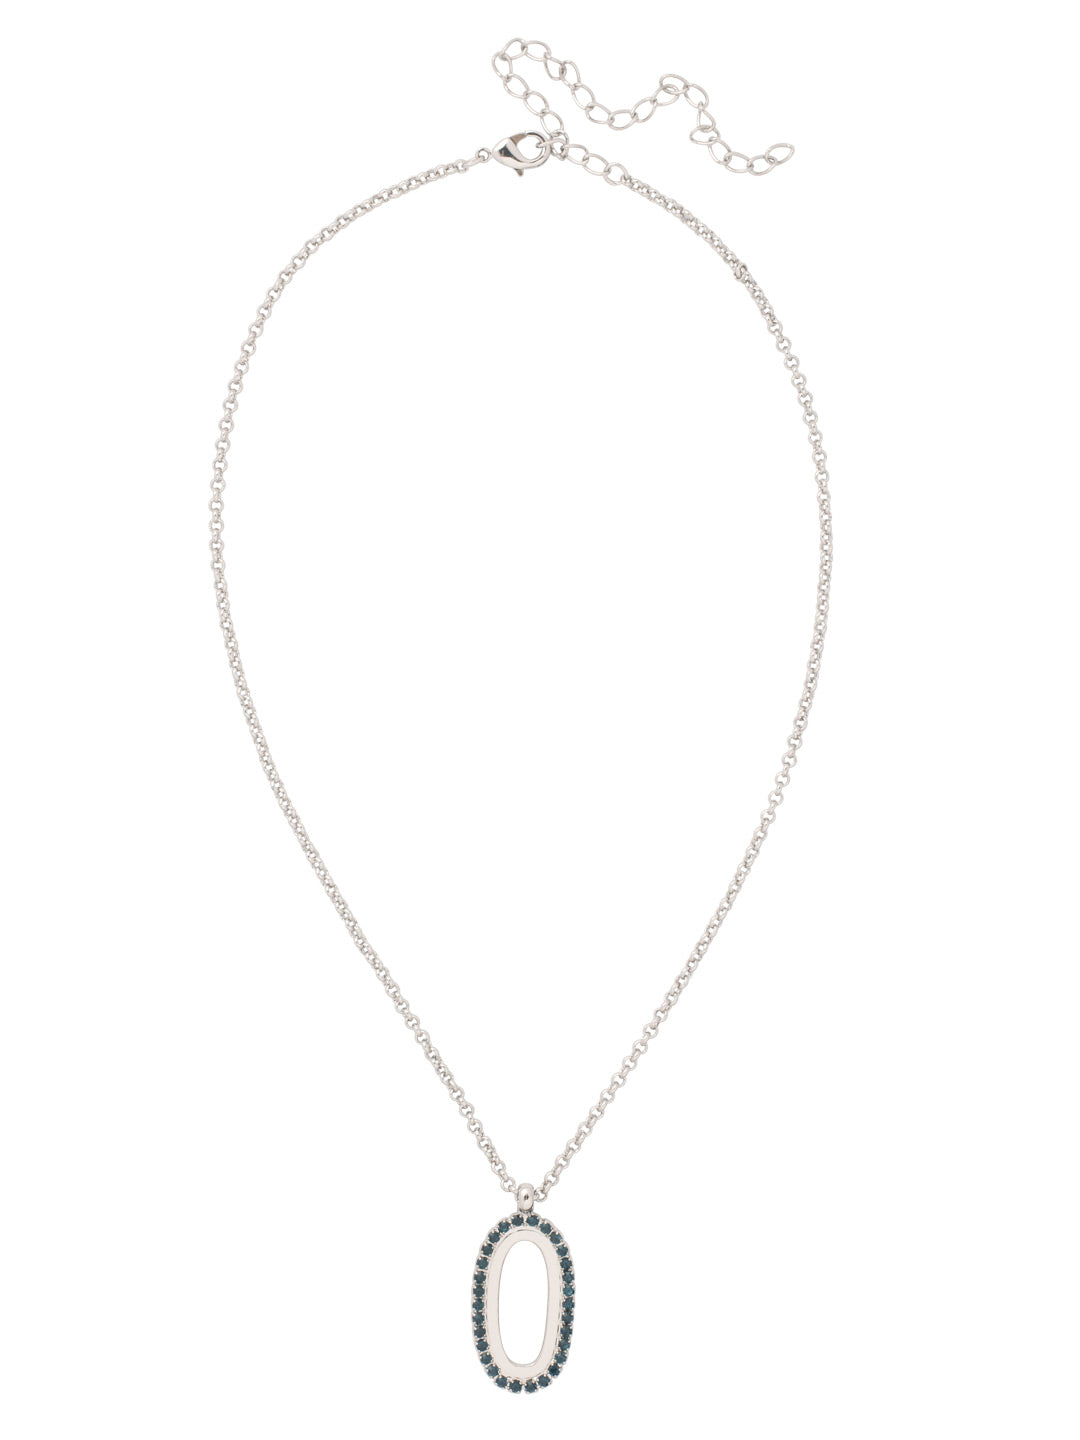 Tori Pendant Necklace - NFL3PDASP - <p>The Tori Pendant Necklace features a single rhinestone embellished chain link on an adjustable chain, secured with a lobster claw clasp. From Sorrelli's Aspen SKY collection in our Palladium finish.</p>